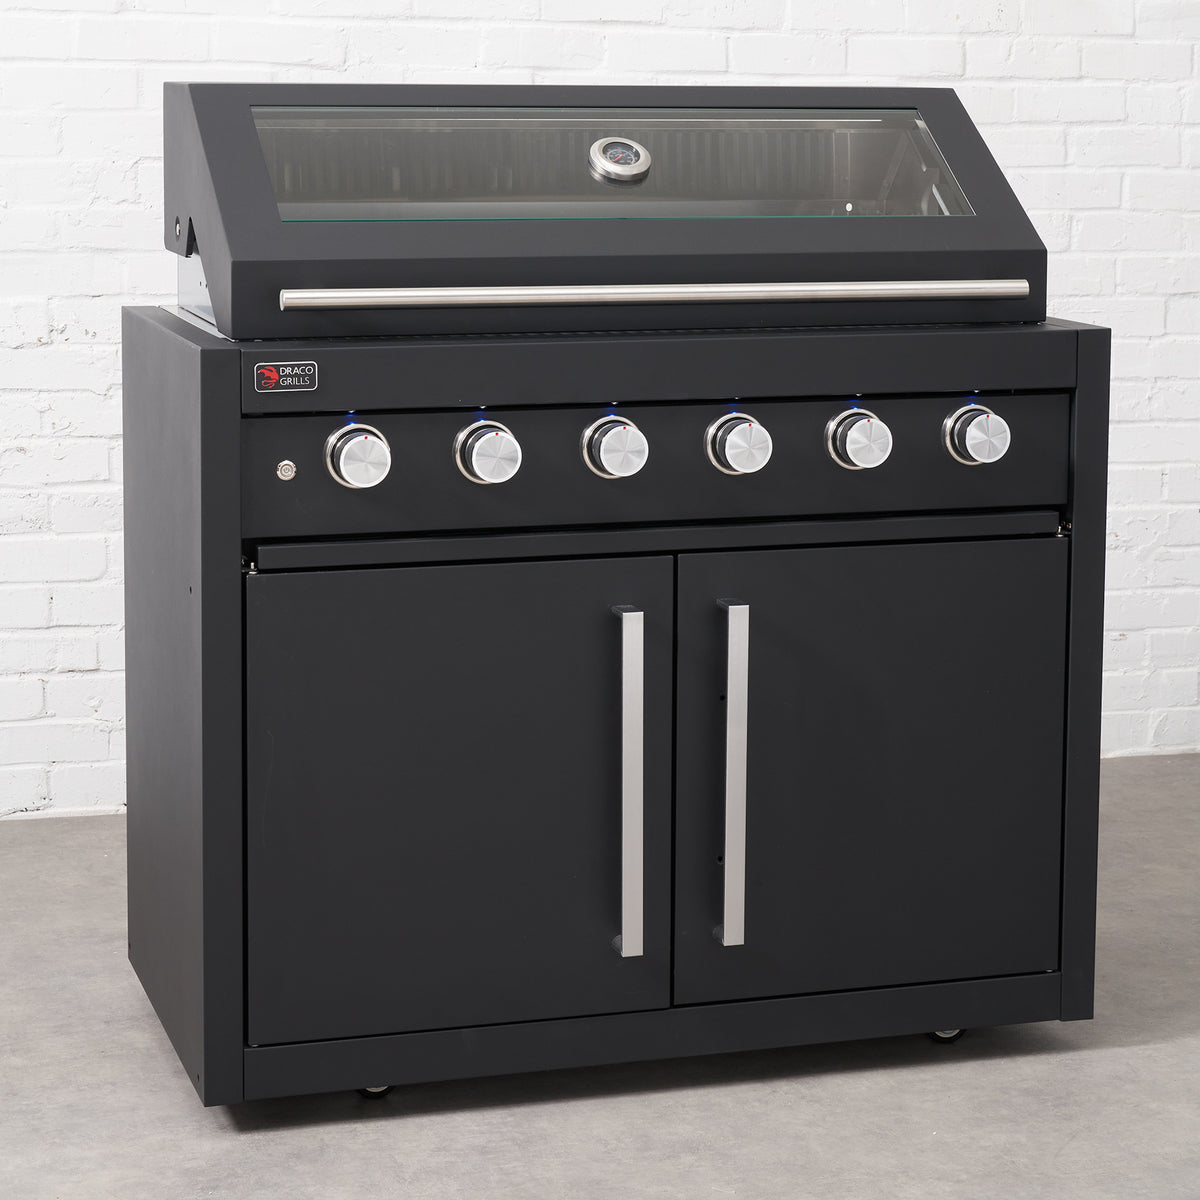 Draco Grills Fusion 6 Burner Black Outdoor Kitchen with Modular Side Burner and Double Fridge